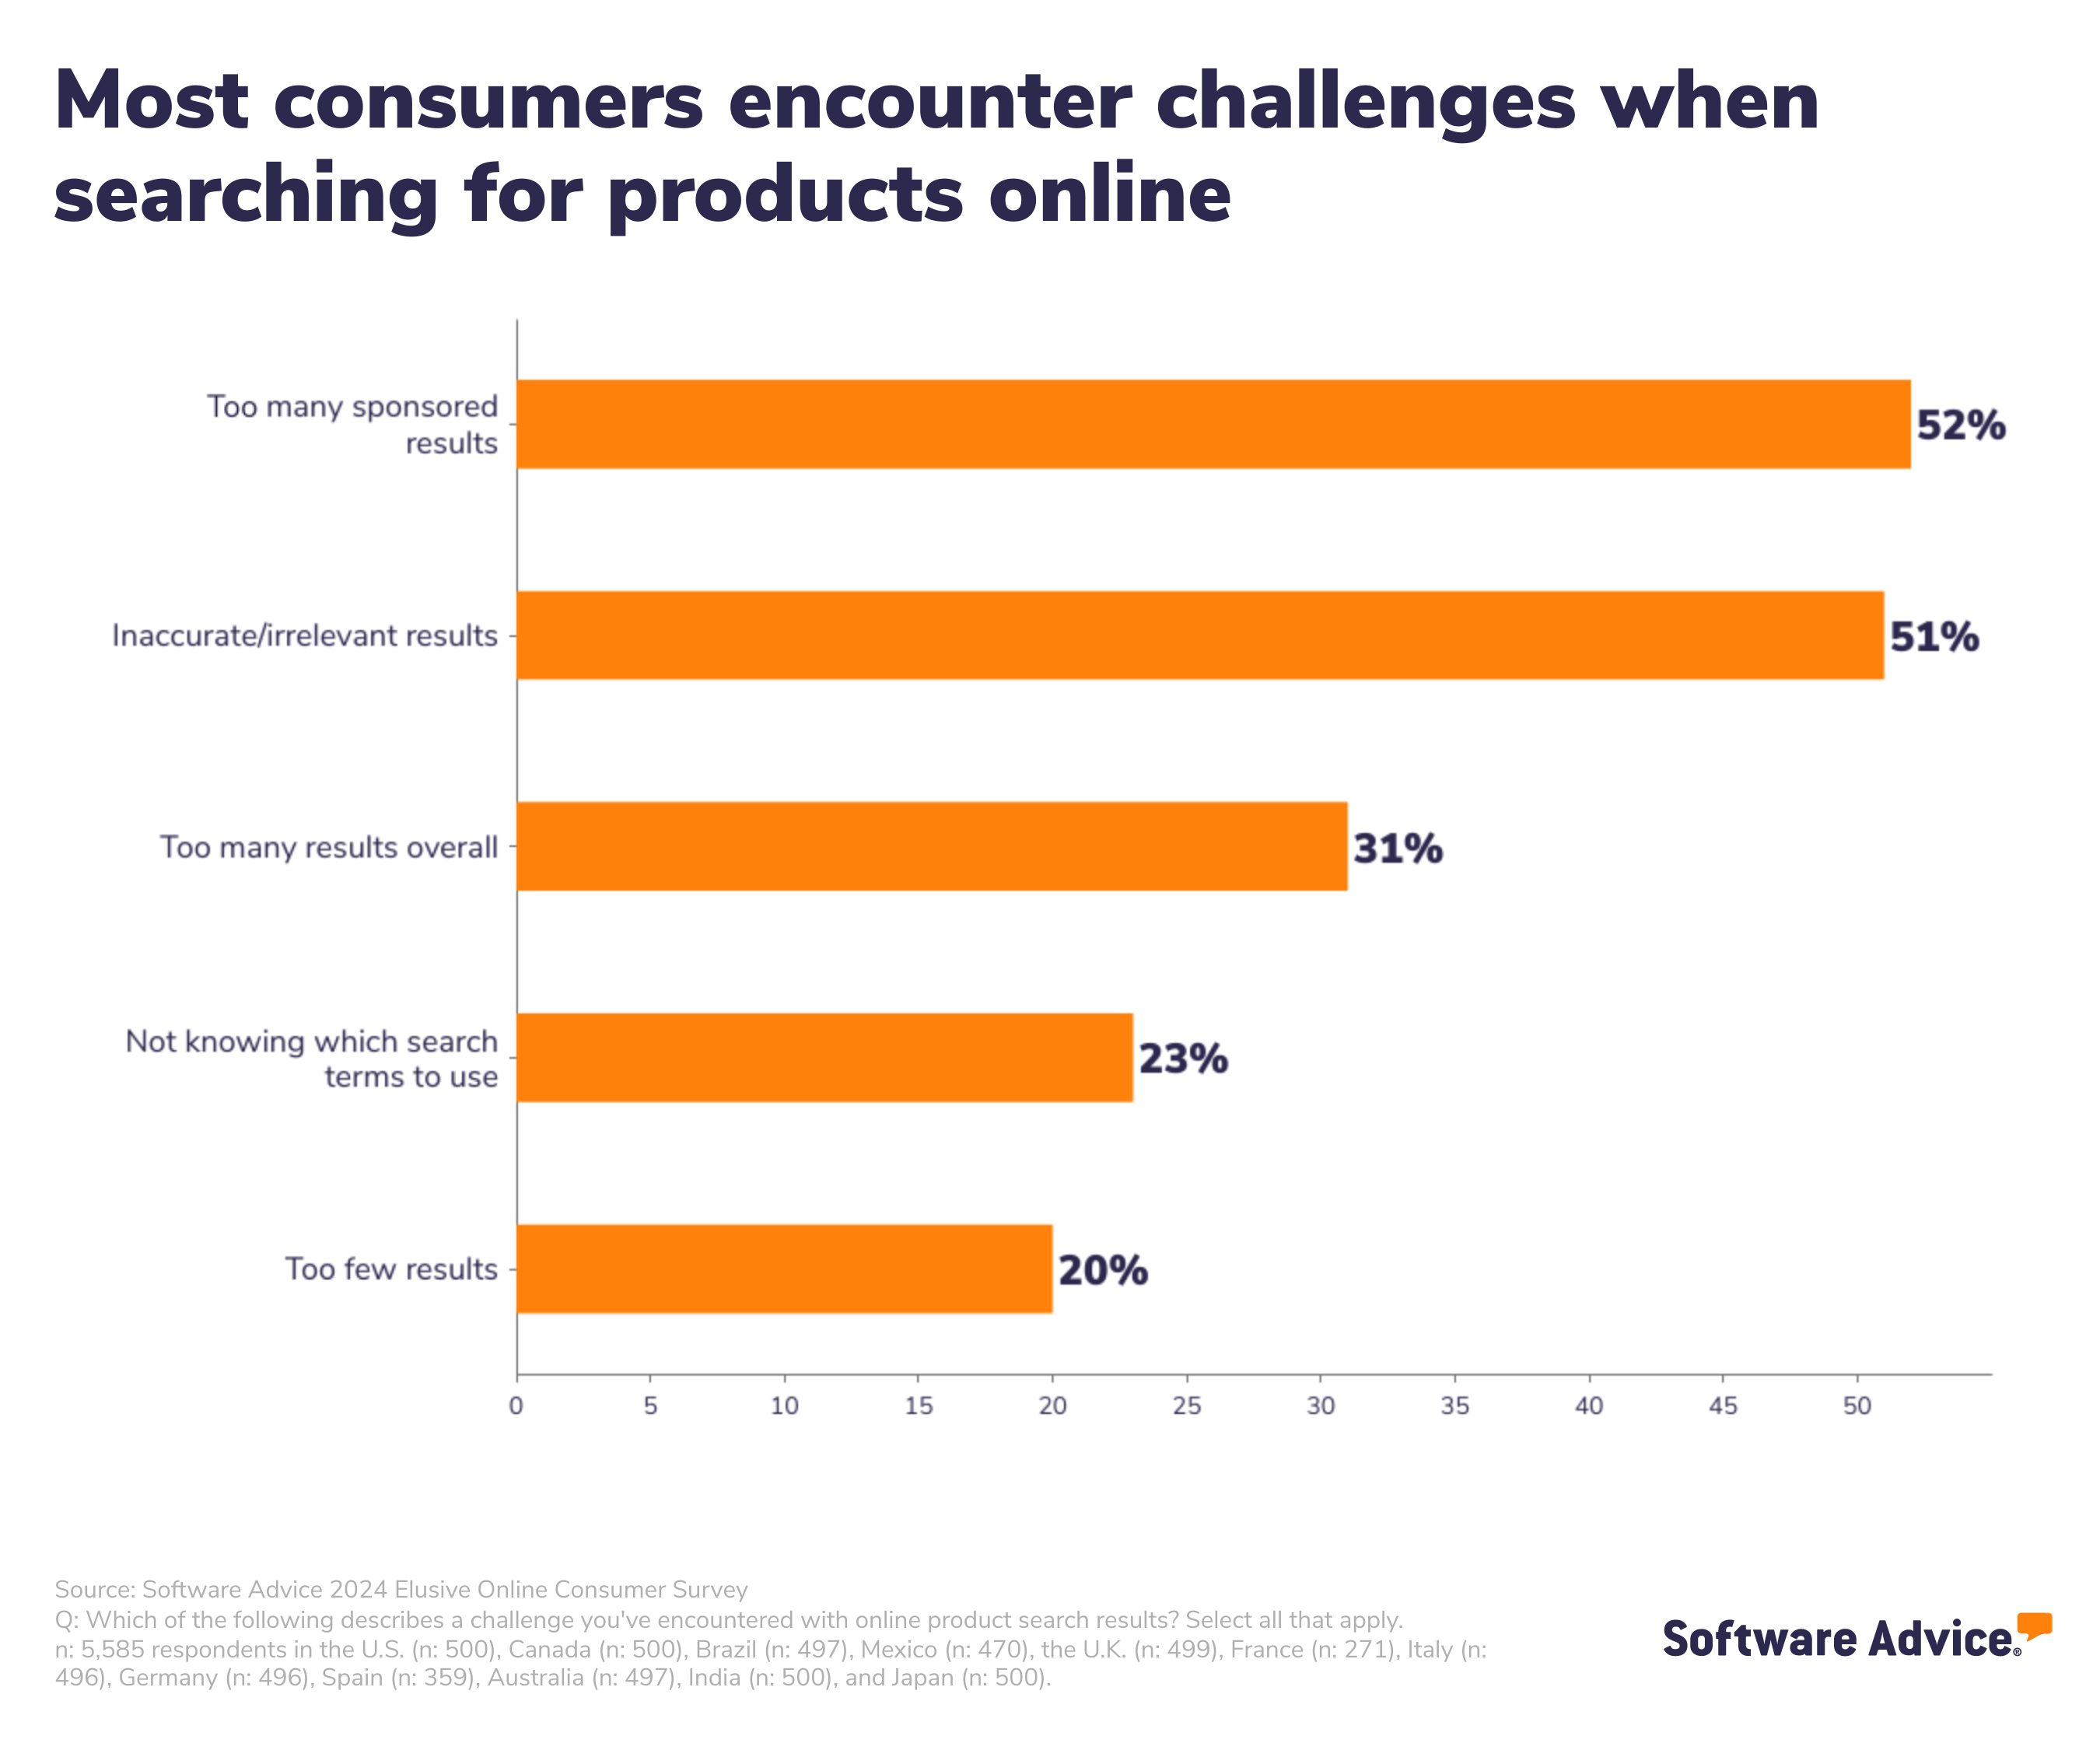 Bar chart showing the challenges consumers face when searching for products online. 